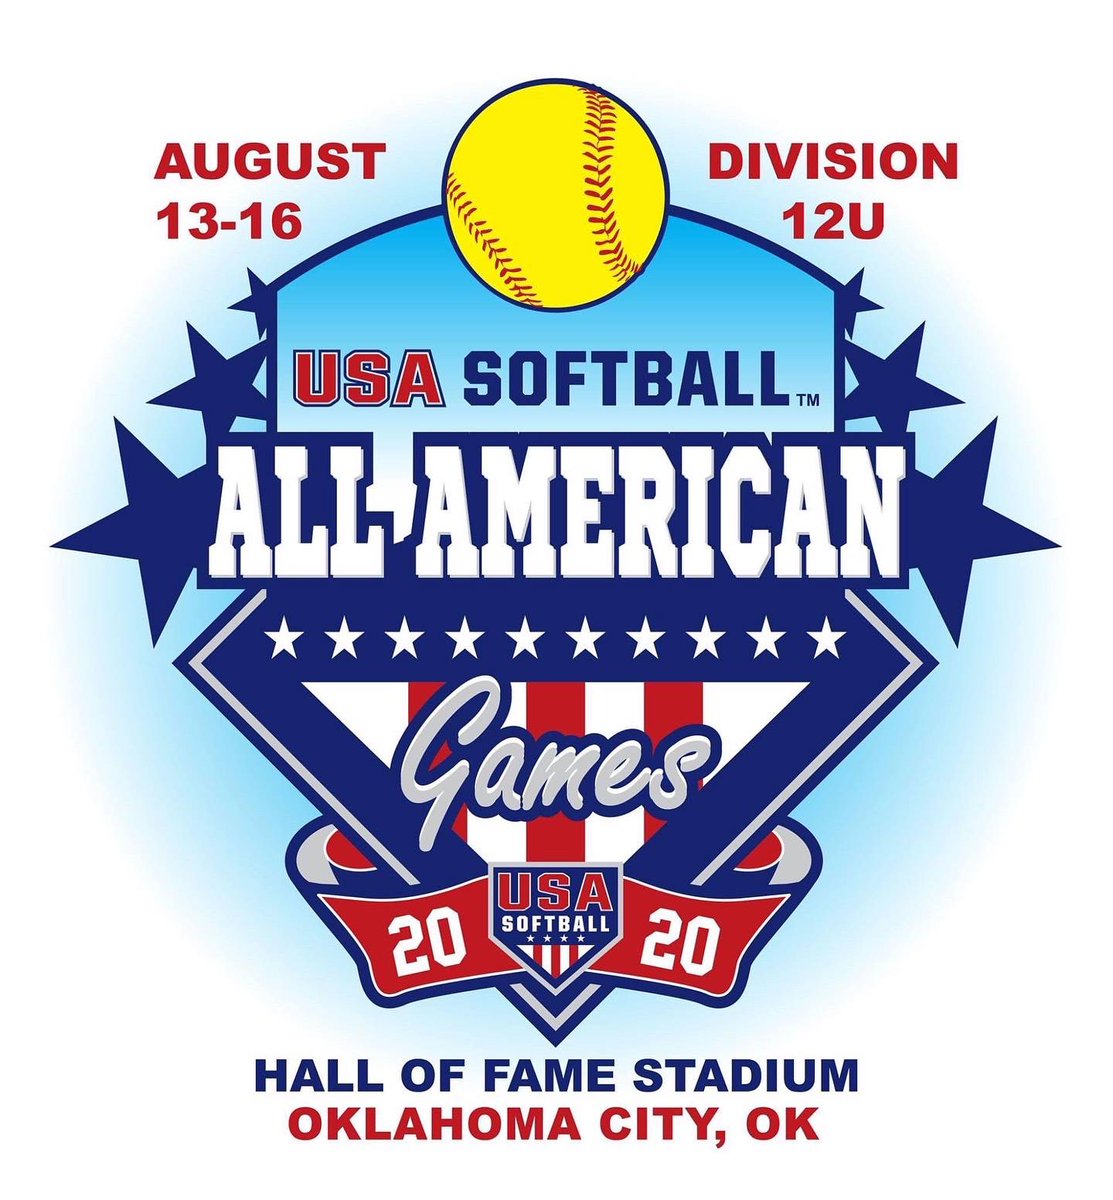 Help us cheer on our #14 as she goes and competes in OKC at the All American Games against some of the best 12u talent in the country! Go represent Gator! #BoltsBoom! #BePremier @Los_Stuff @ExtraInningSB